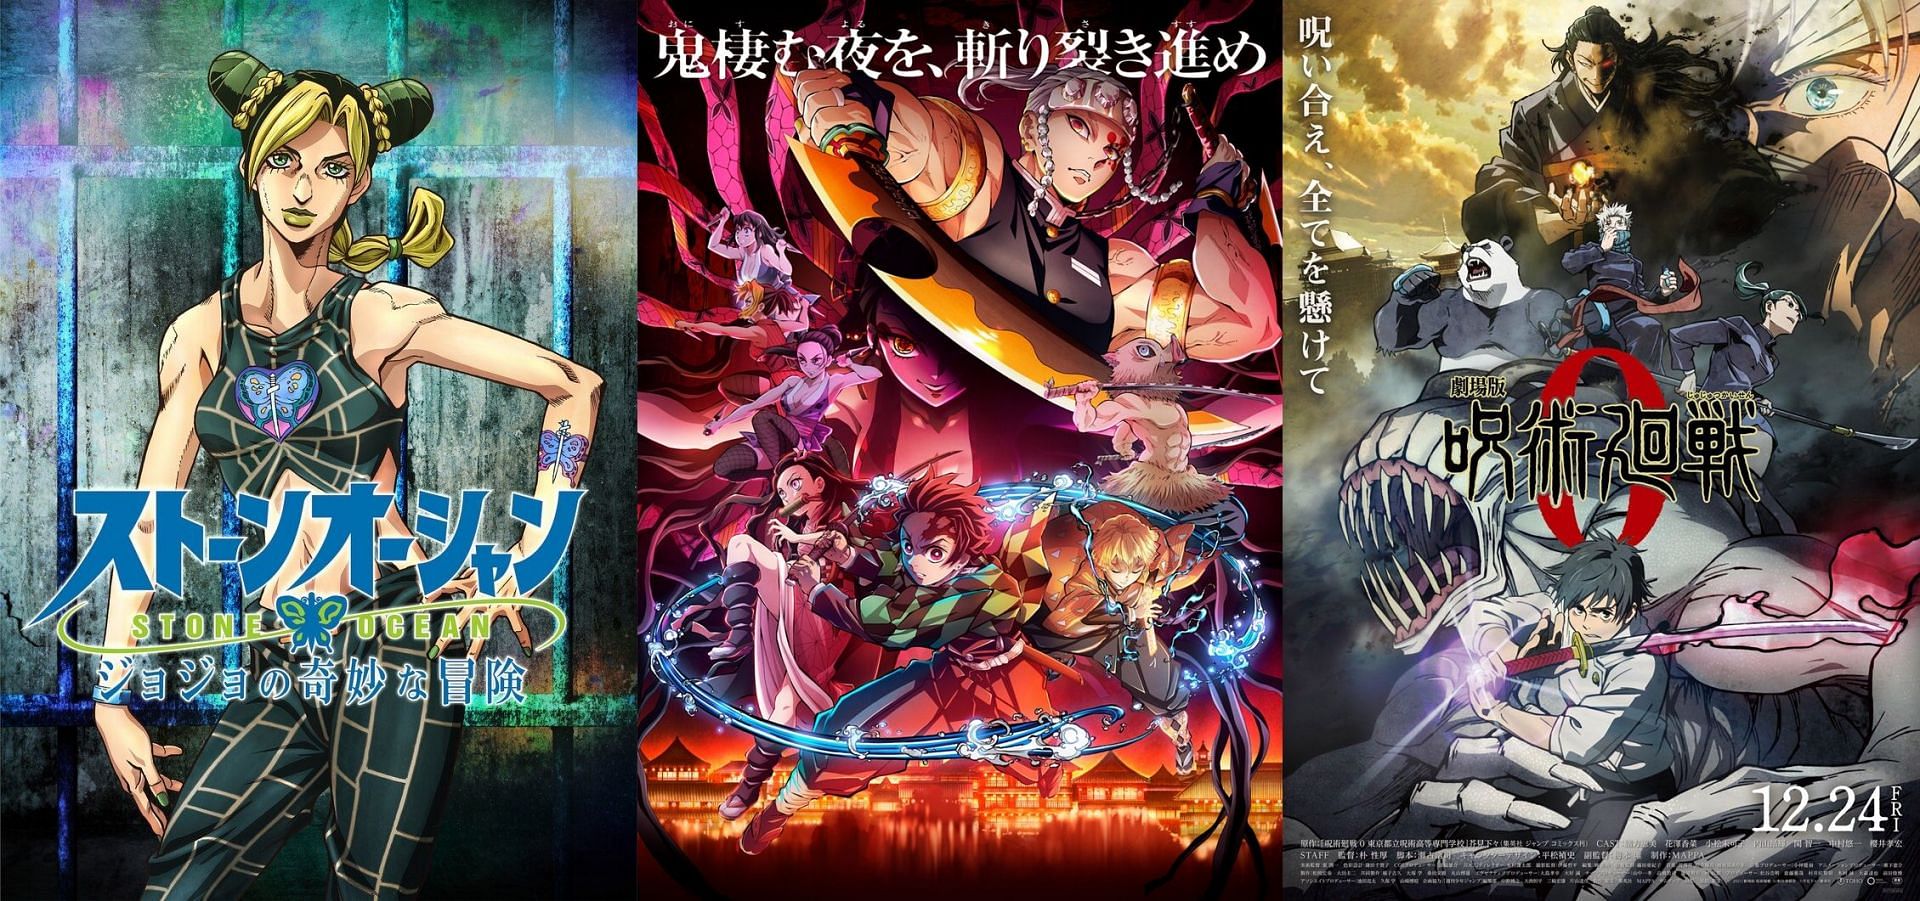 iQiyi Announces Summer Anime Slate With Tokyo Revengers & More